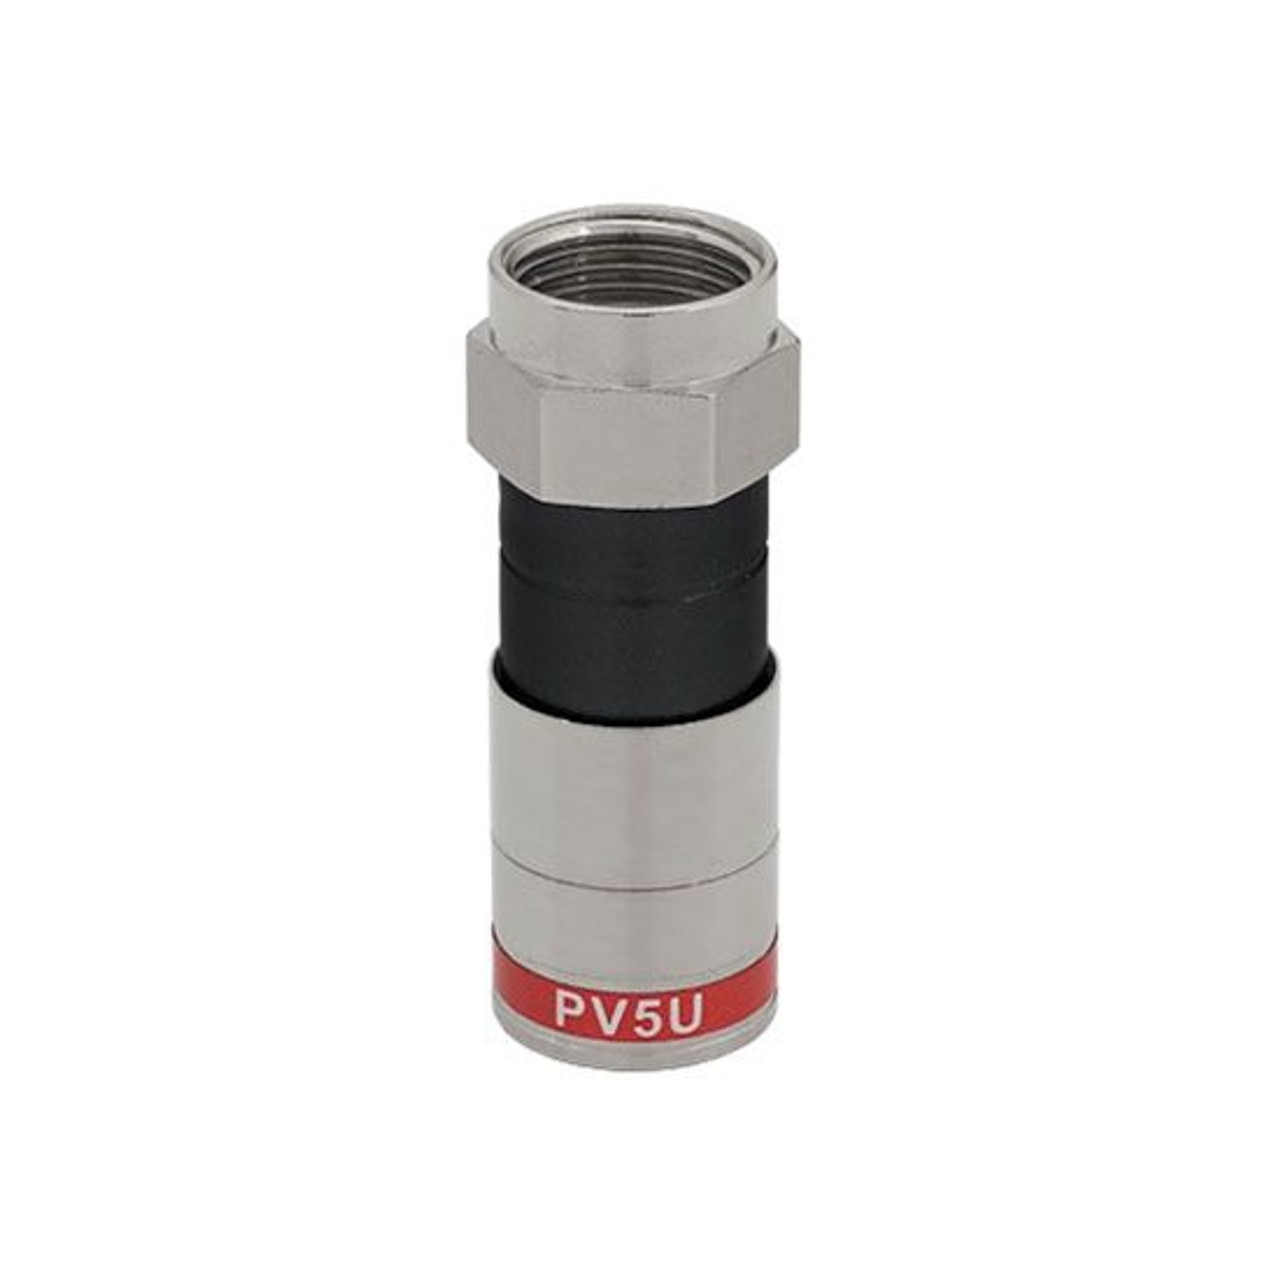 Eagle RG59 F Compression Connector Coaxial 50 Pack Permaseal 360 Ridgeloc Red Precision Machined Any Tool Design Lock-In PermaSeal Plugs